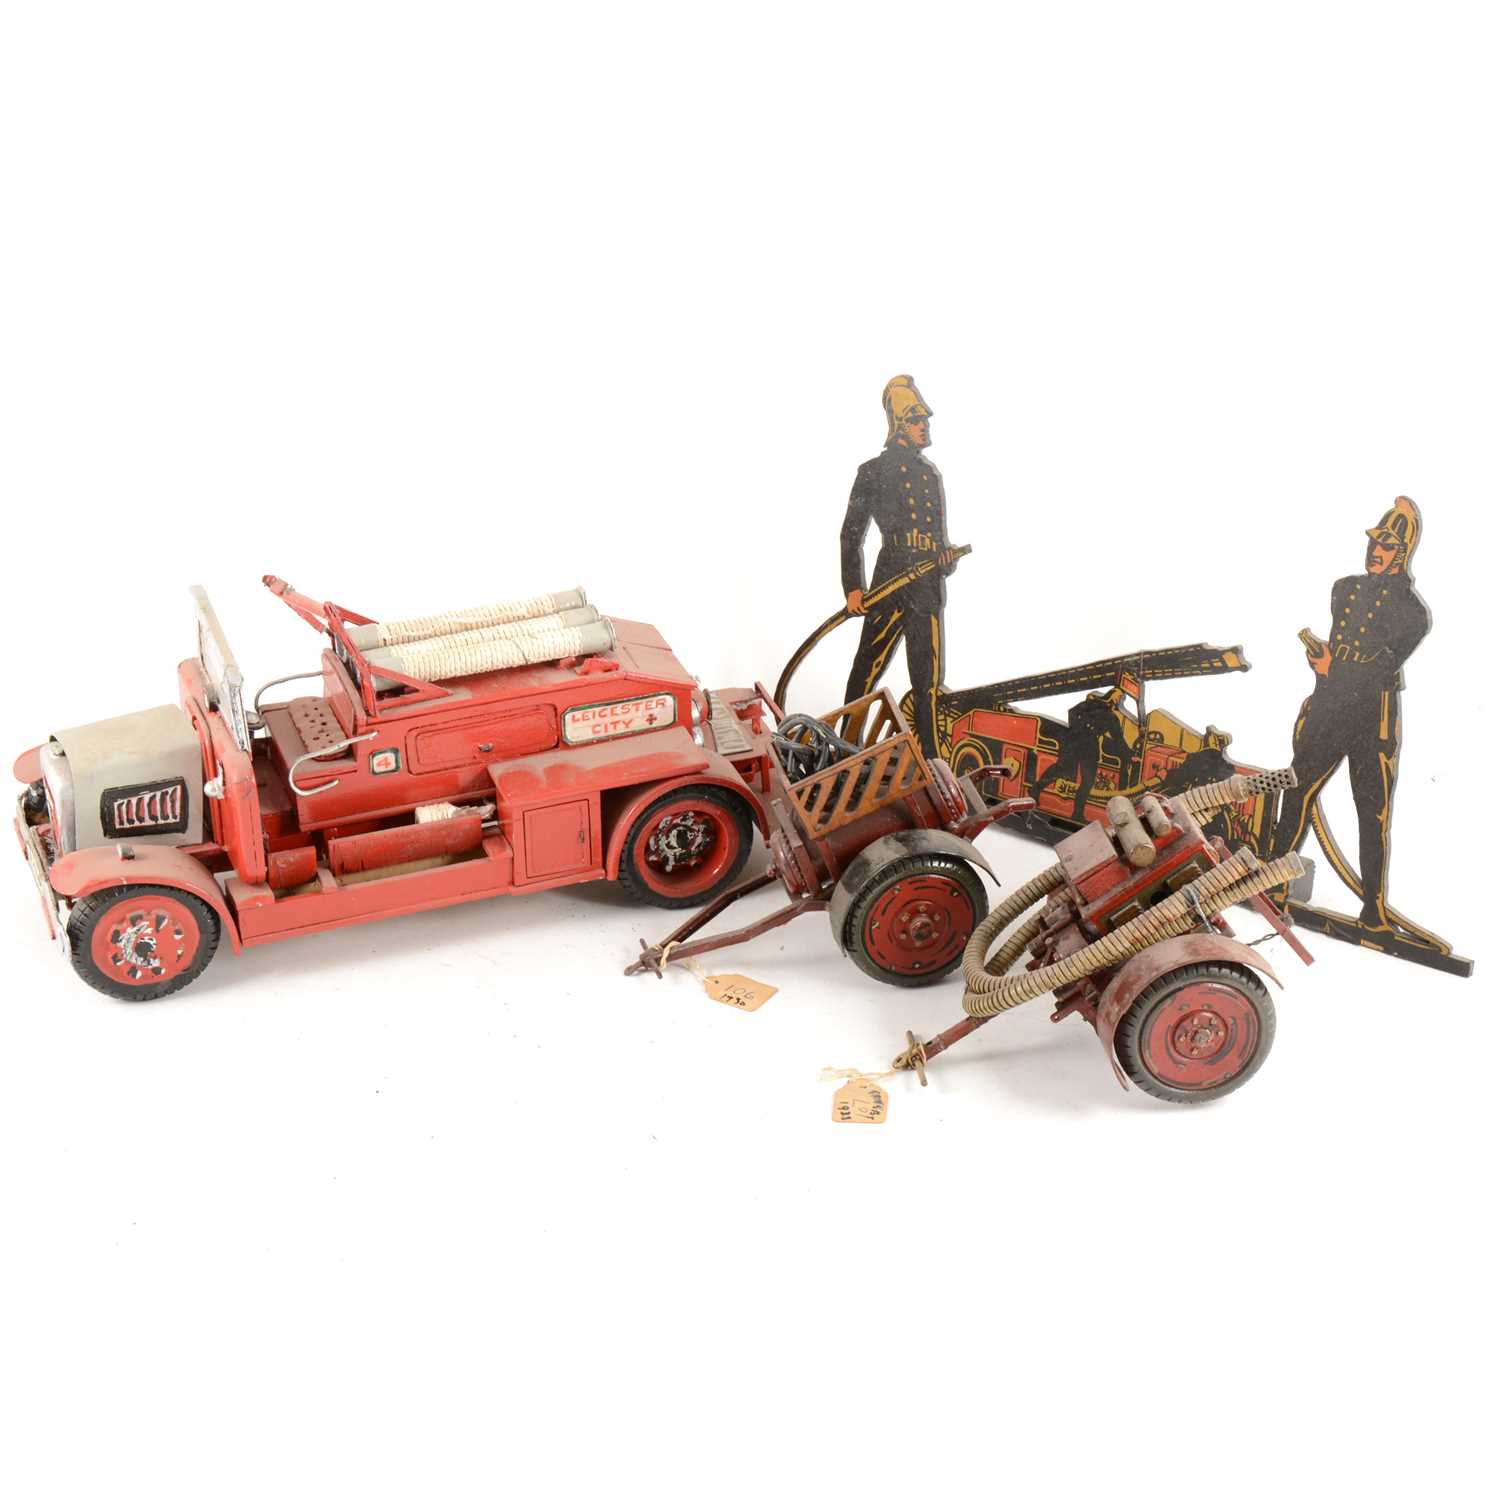 Lot 116 - A scratch-built model of a Field Hay Stack fires engine, c1920, hose trailers and firemen cut-out.